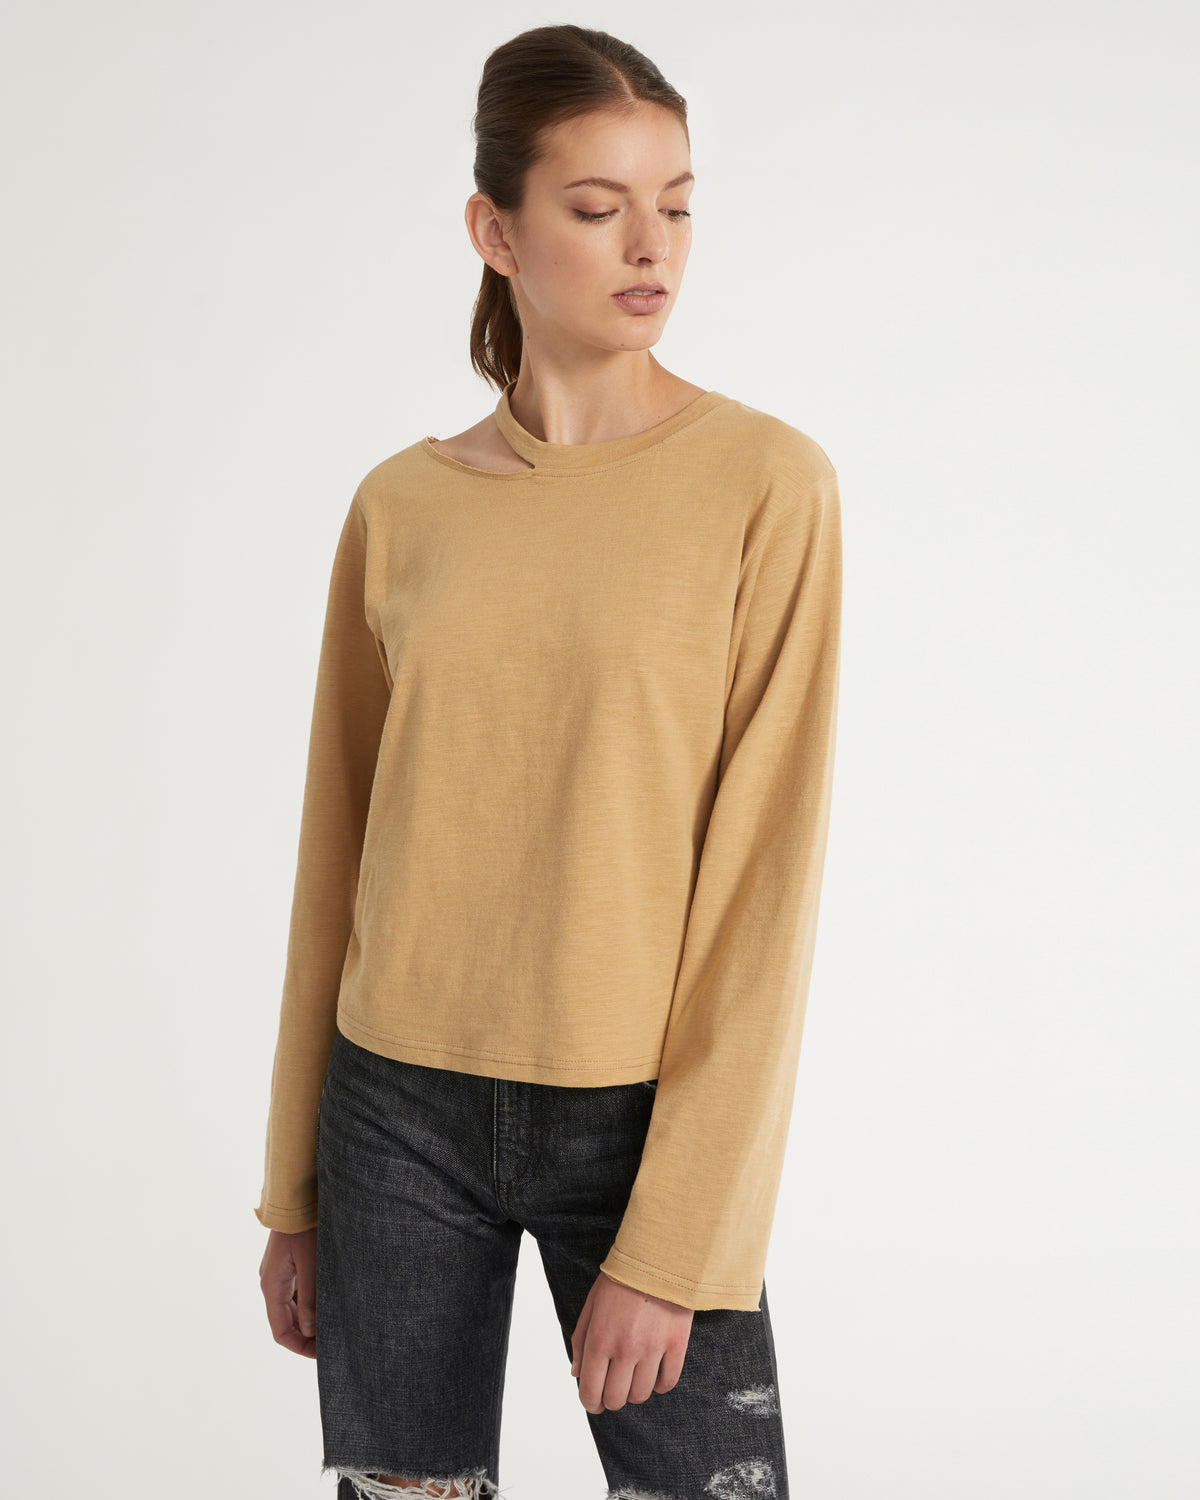 Tate Cut Out Long Sleeve in Sedona